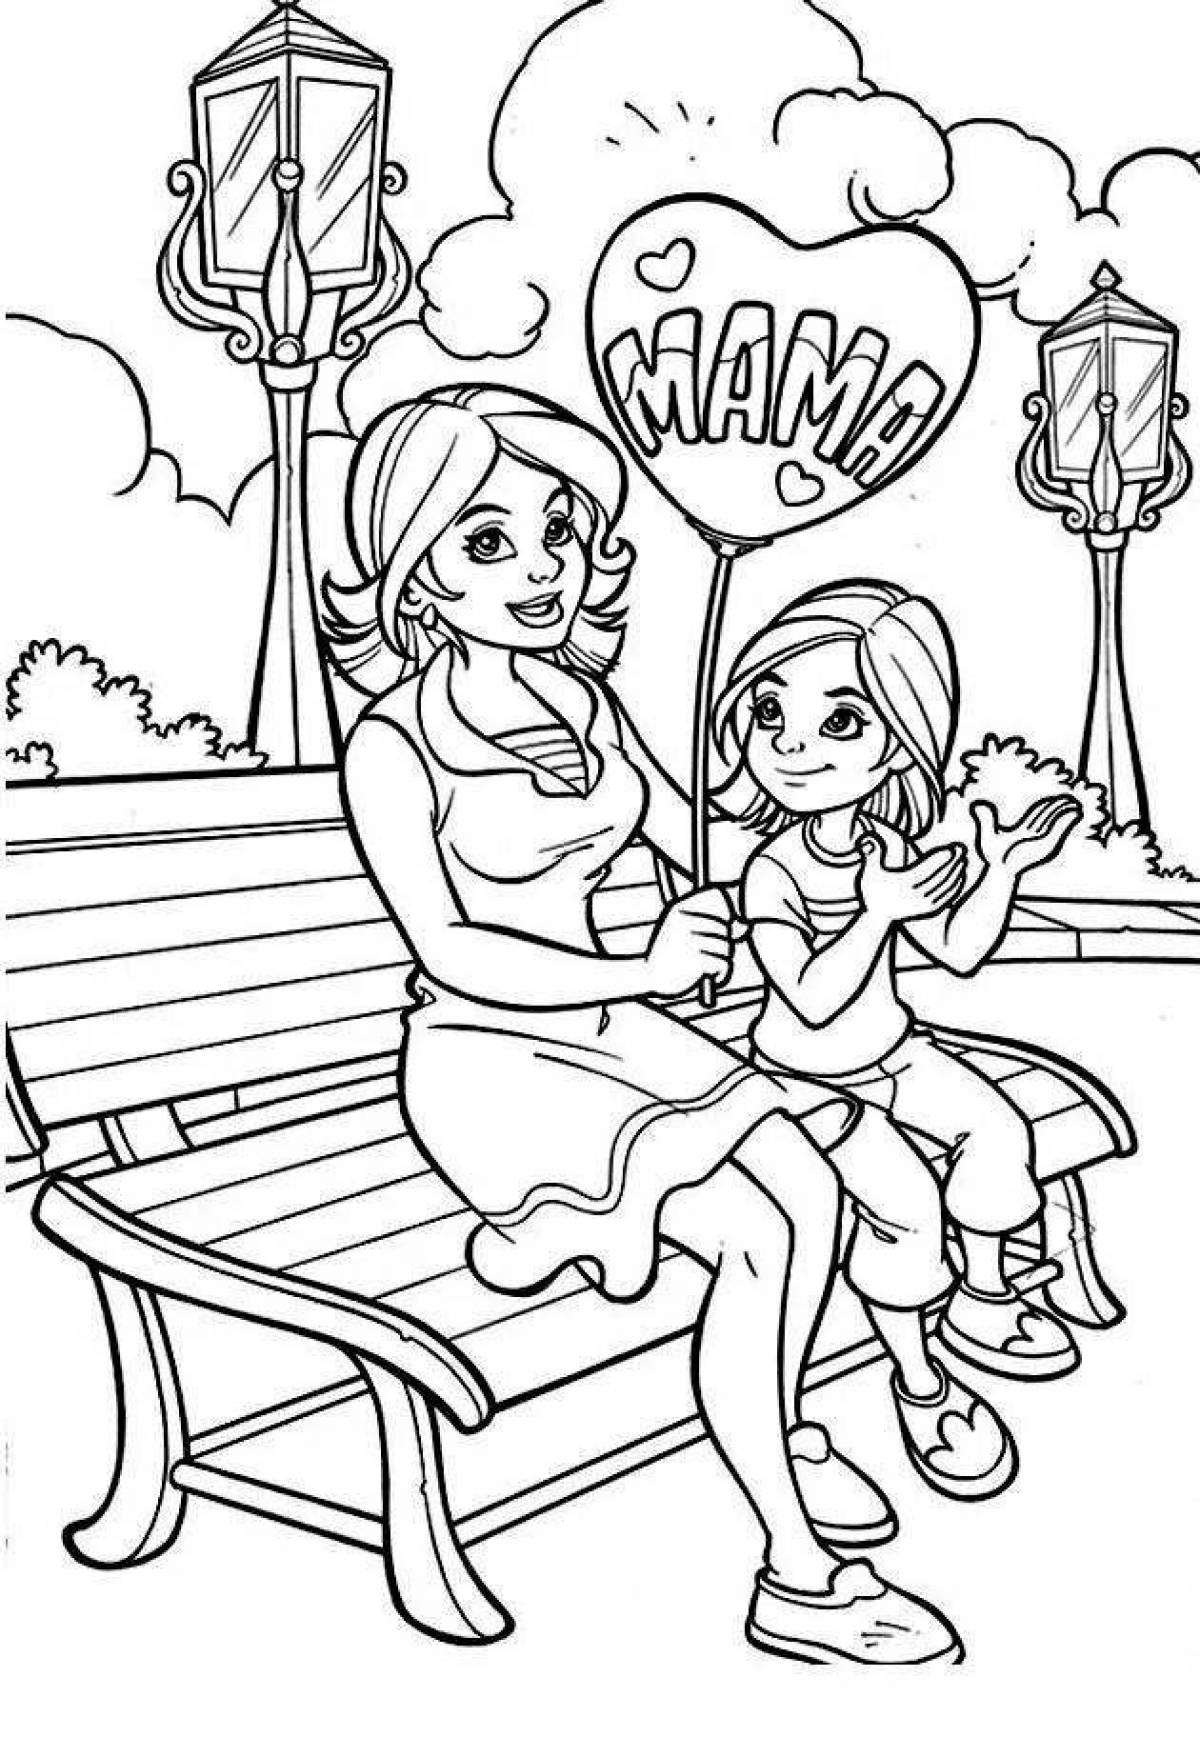 Amazing coloring book for mom from daughter